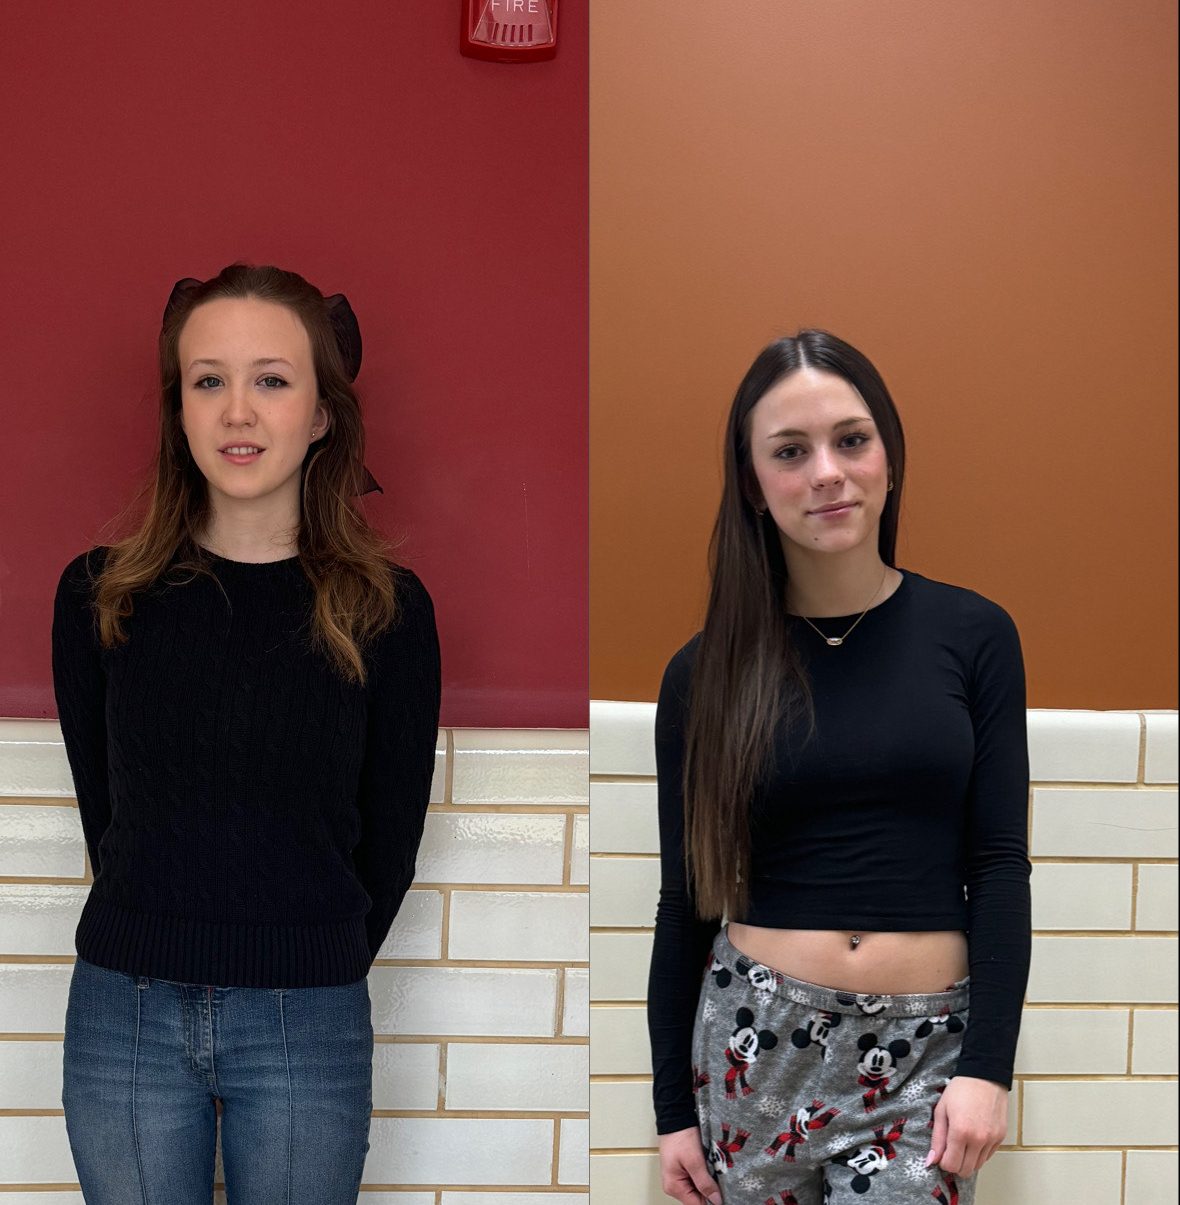 From pajamas to sweaters, students in American schools represent a variety of different fashion styles, as shown by senior Sofie Gerleit and freshmen Chyanne Dusseljee.